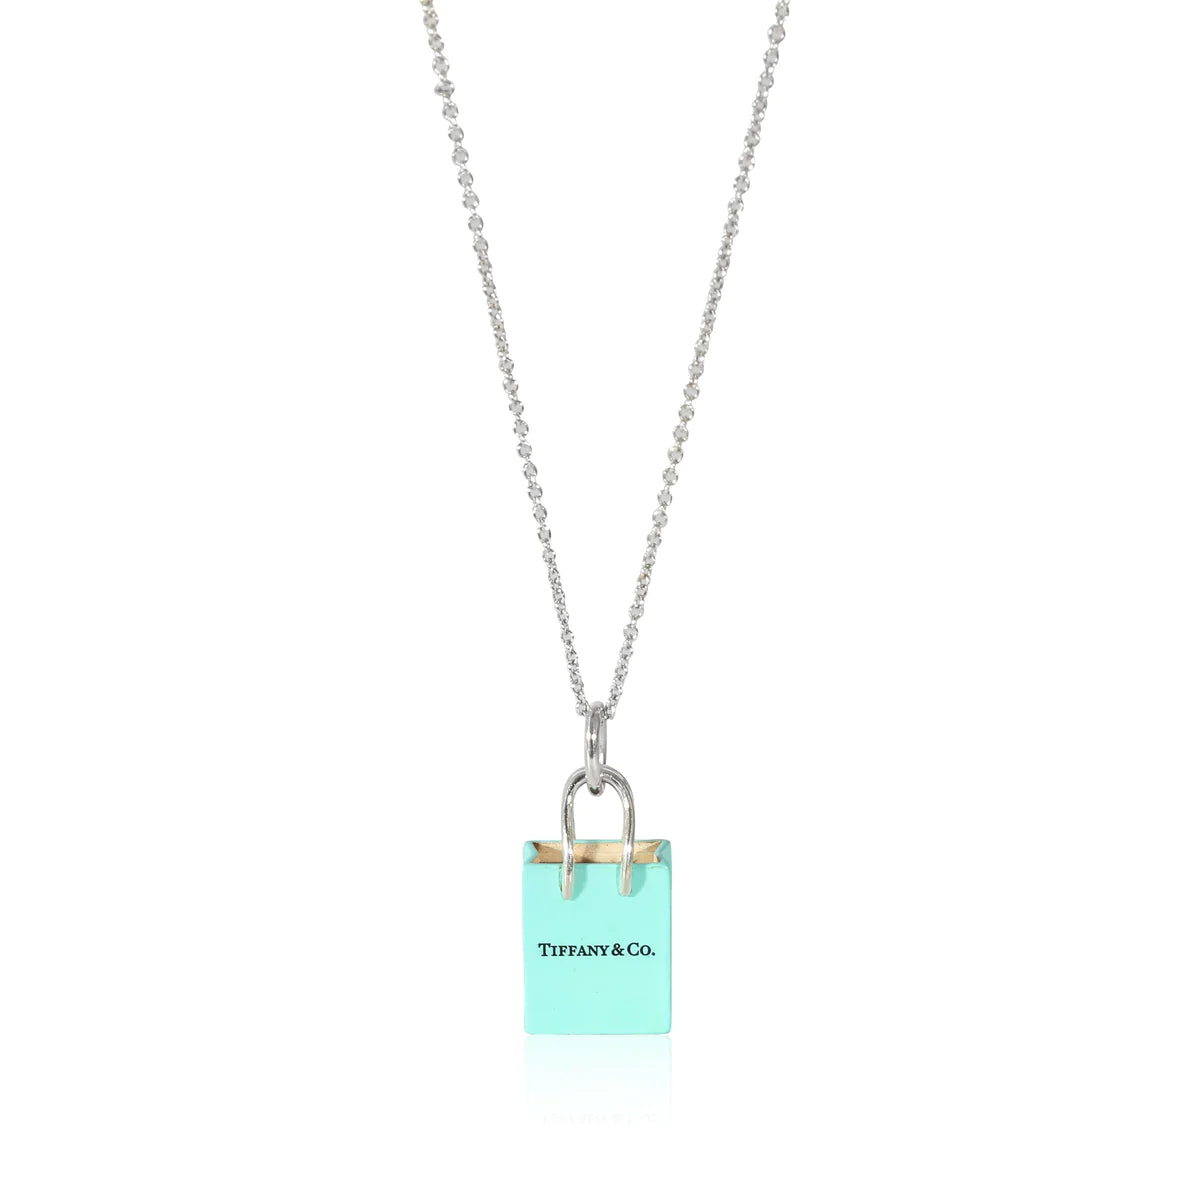 Tiffany & Co. Blue Enamel Shopping Bag Charm Necklace in Sterling Silver